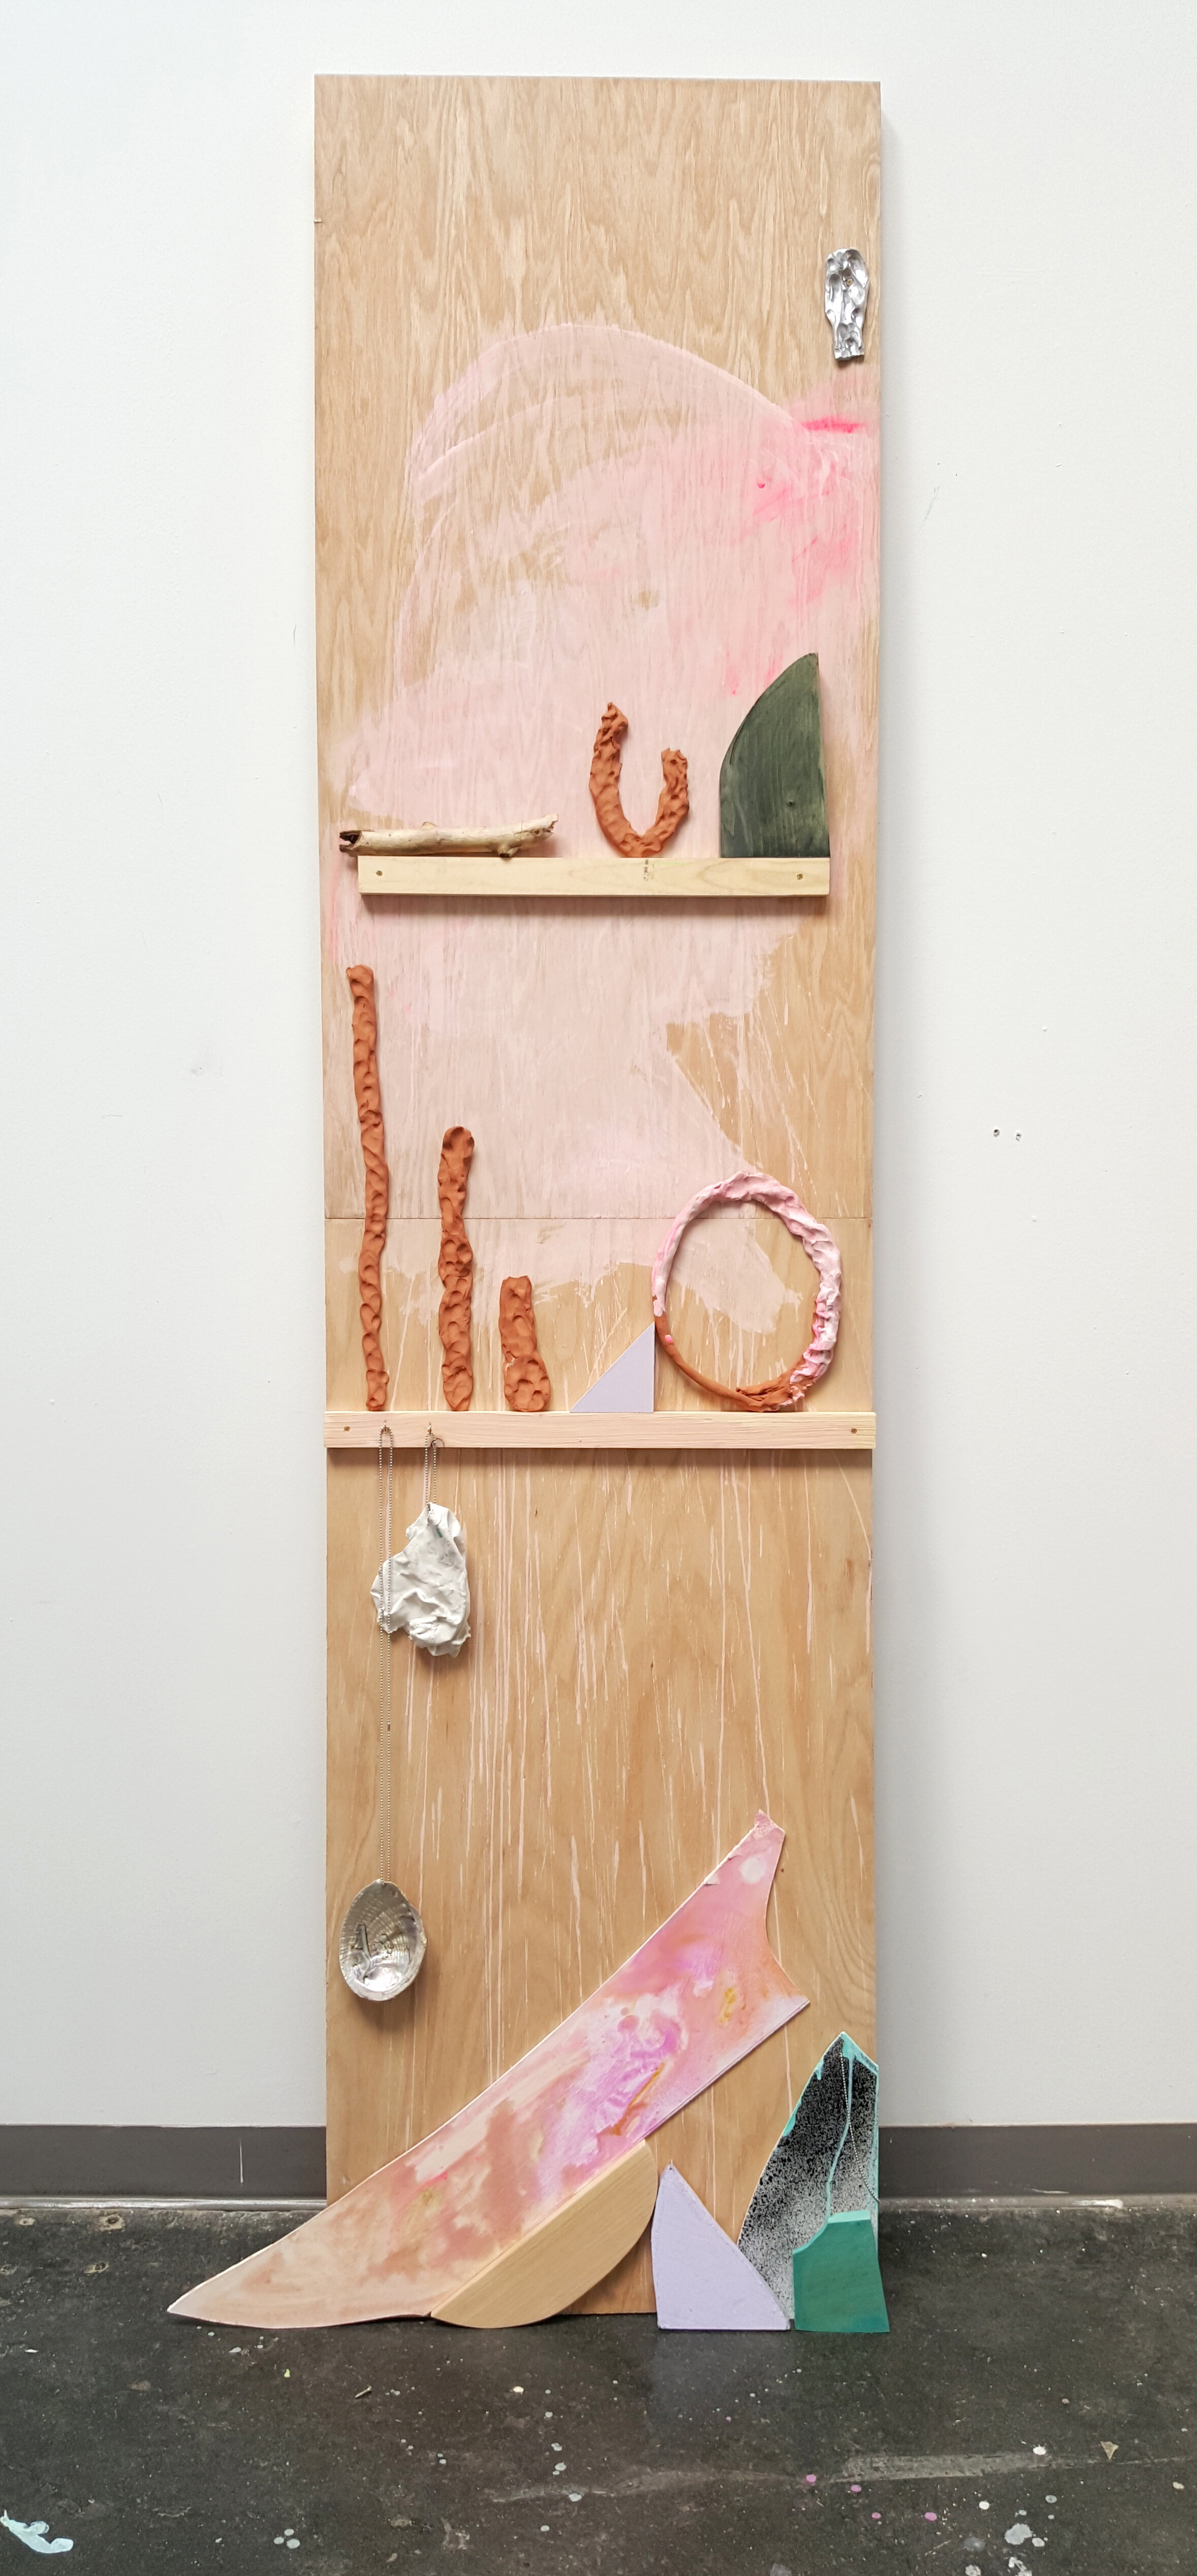   The Fertility Goddess Imagines the Structure of the Universe, Part 3 (Cabinet of Curiosities) , 2016 Cut and painted wood, self-firing clay, hooks, ball chain, canvas, plaster, shell, acrylic, gouache and spray paint 96 x 24 inches 